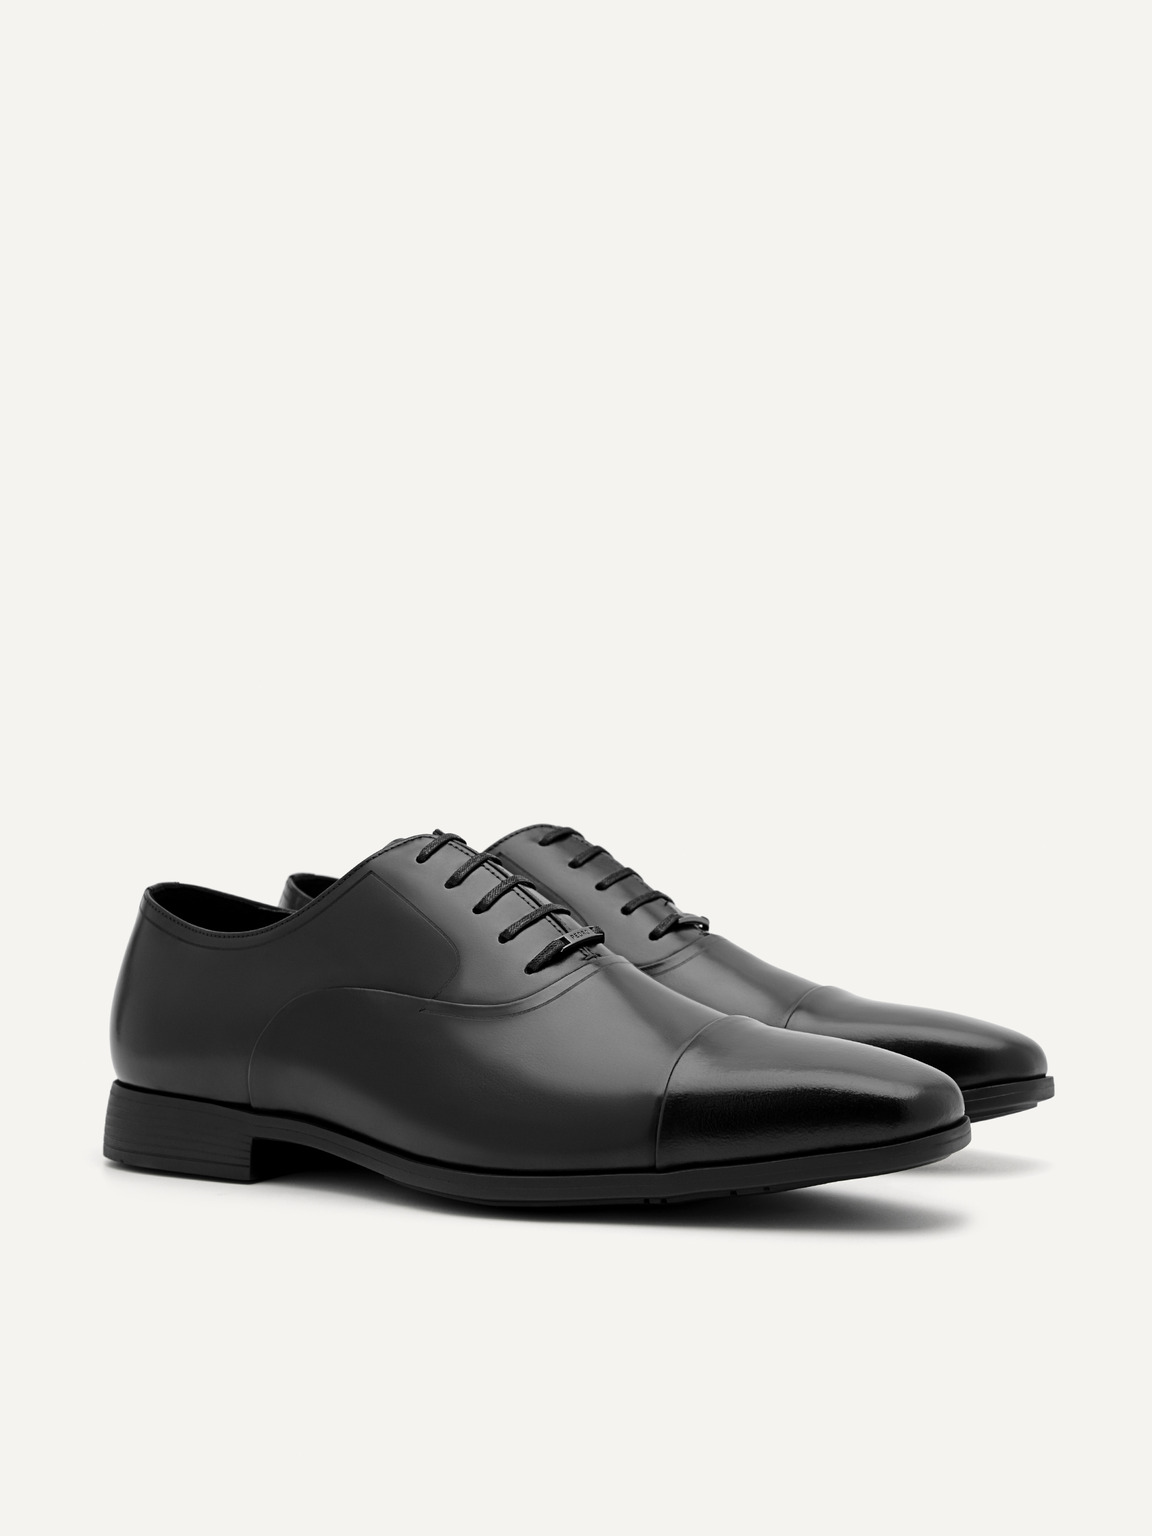 Altitude Lightweight Oxford Shoes, Black